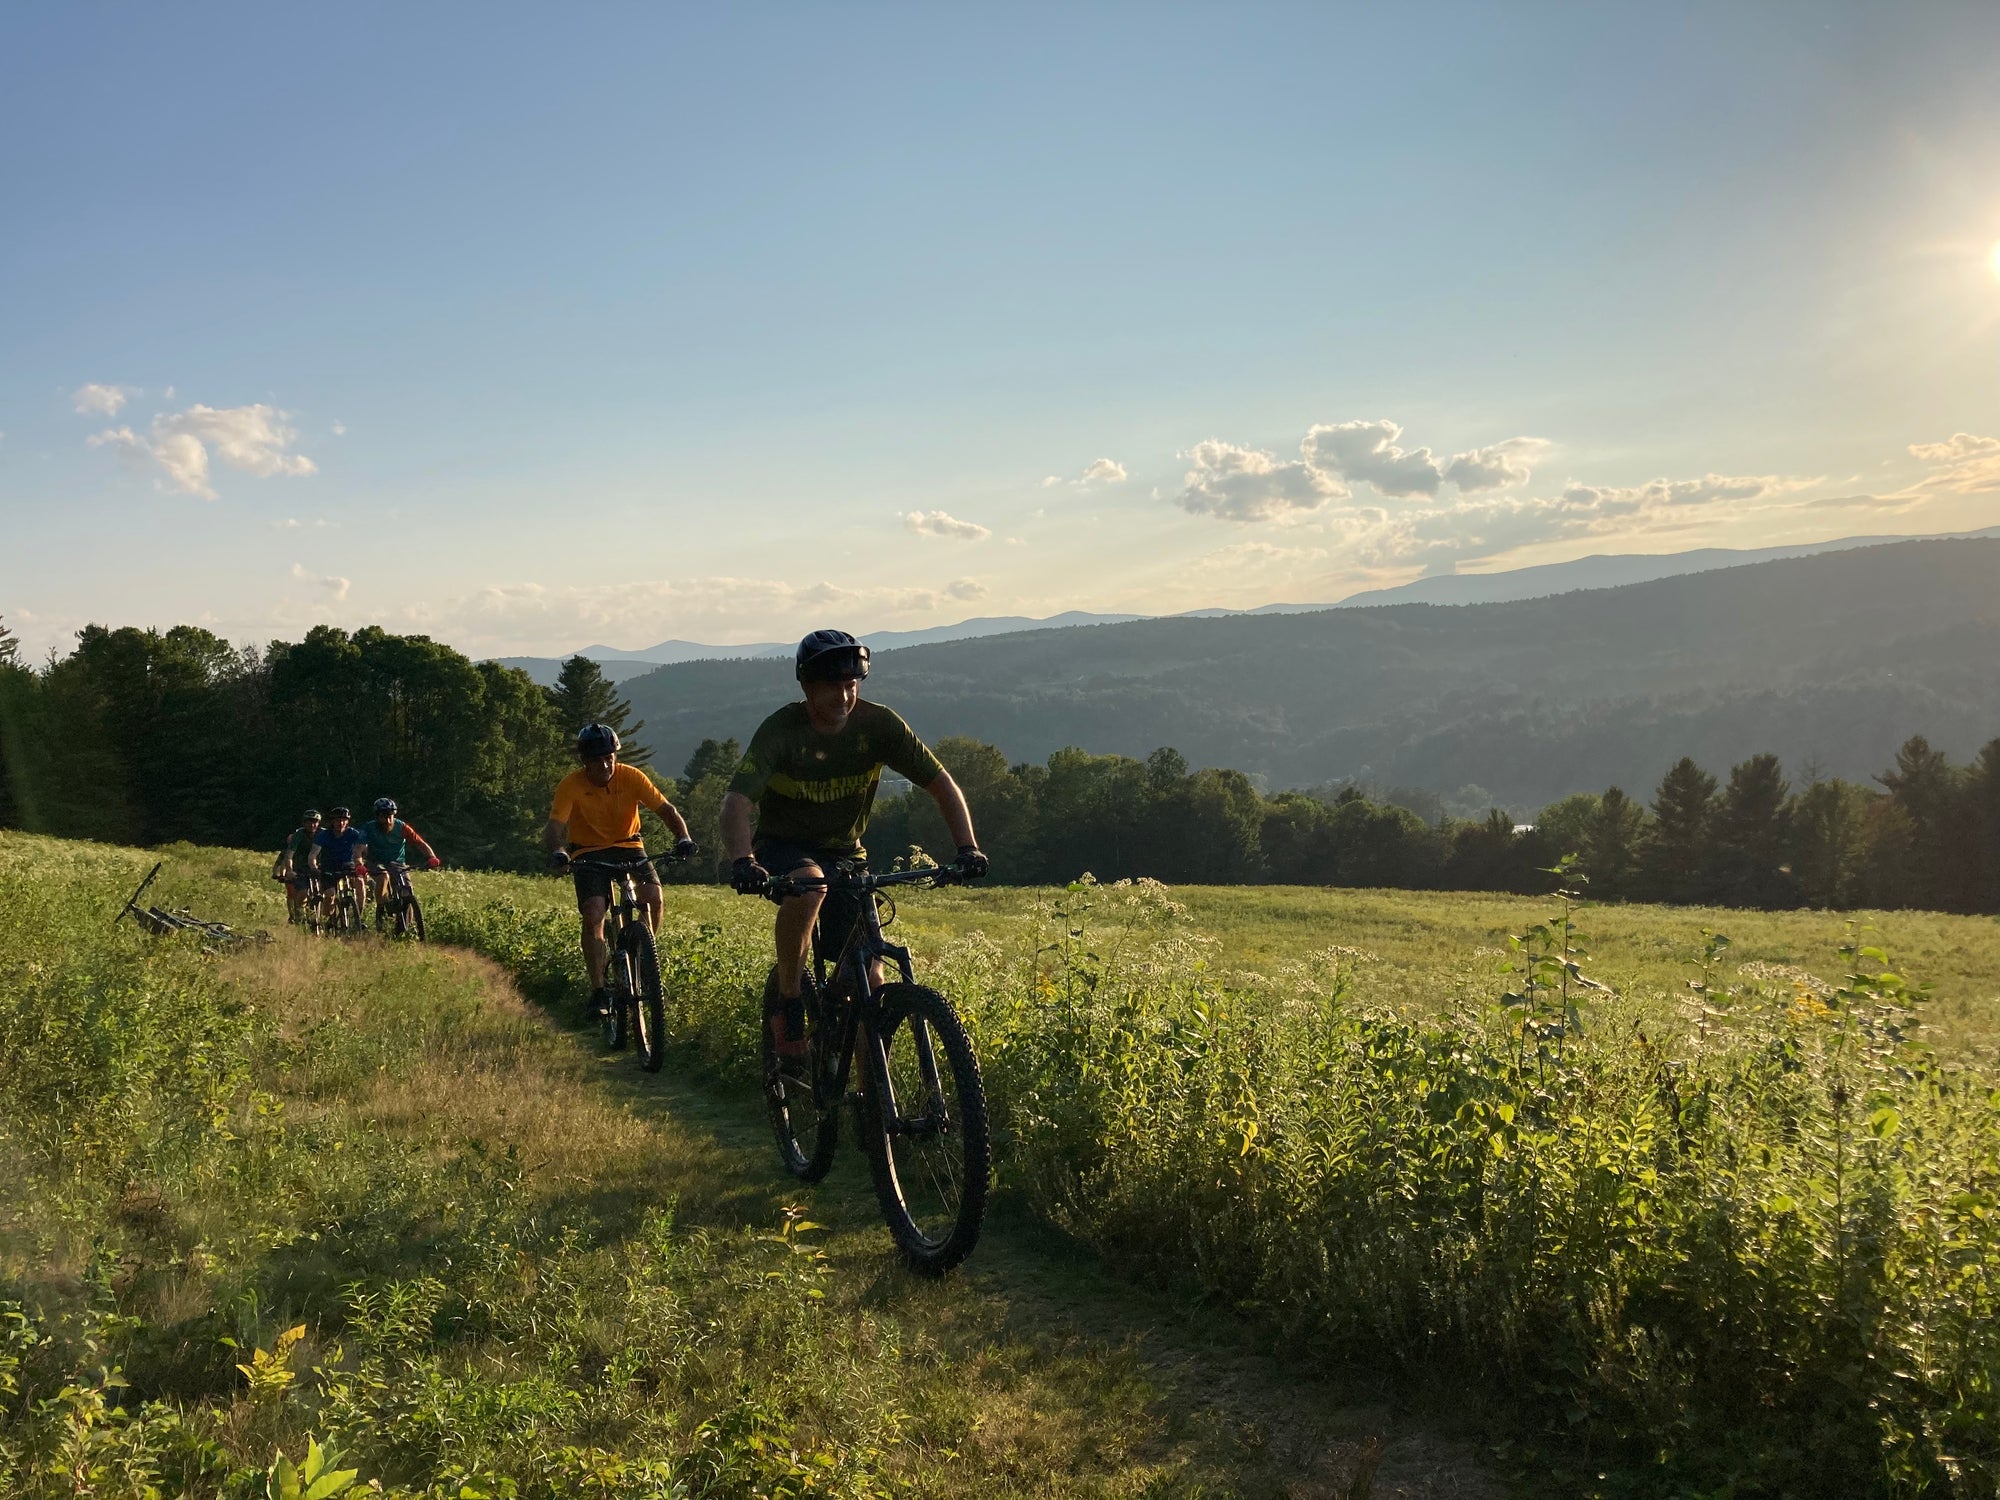 A mountain biker waving riding in a field with a couple riders behind them